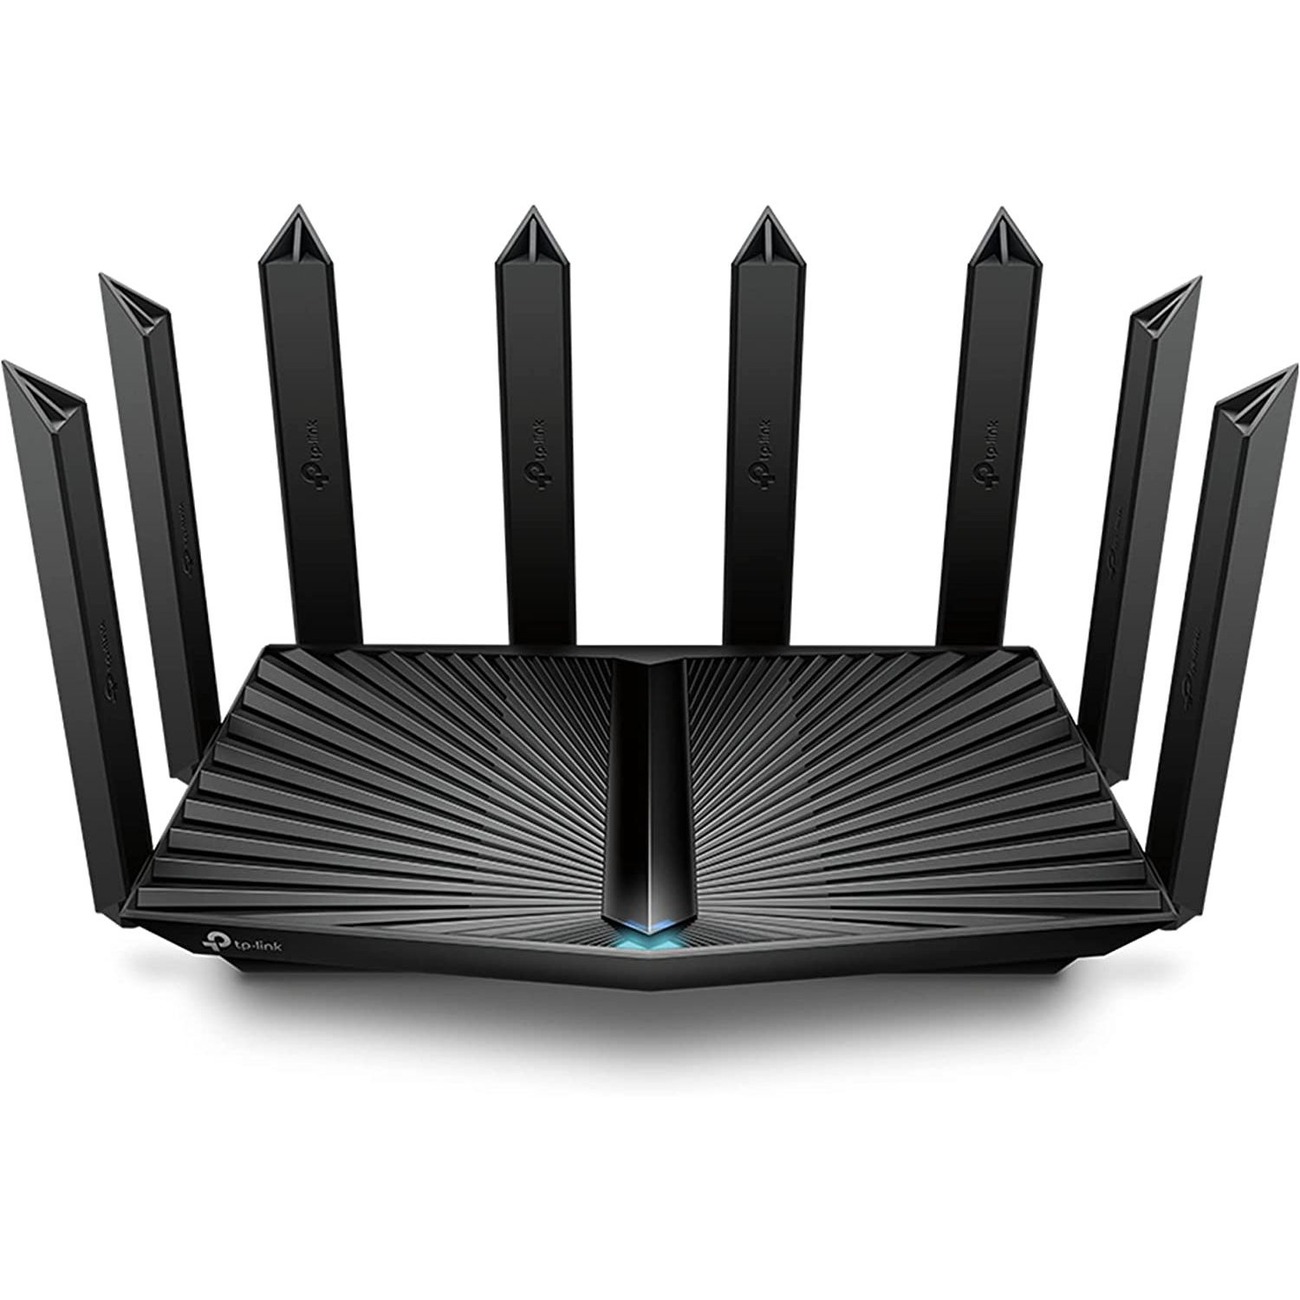 TP-Link AX6000 8-Stream Wi-Fi 6 Router with 2.5G Port (Archer